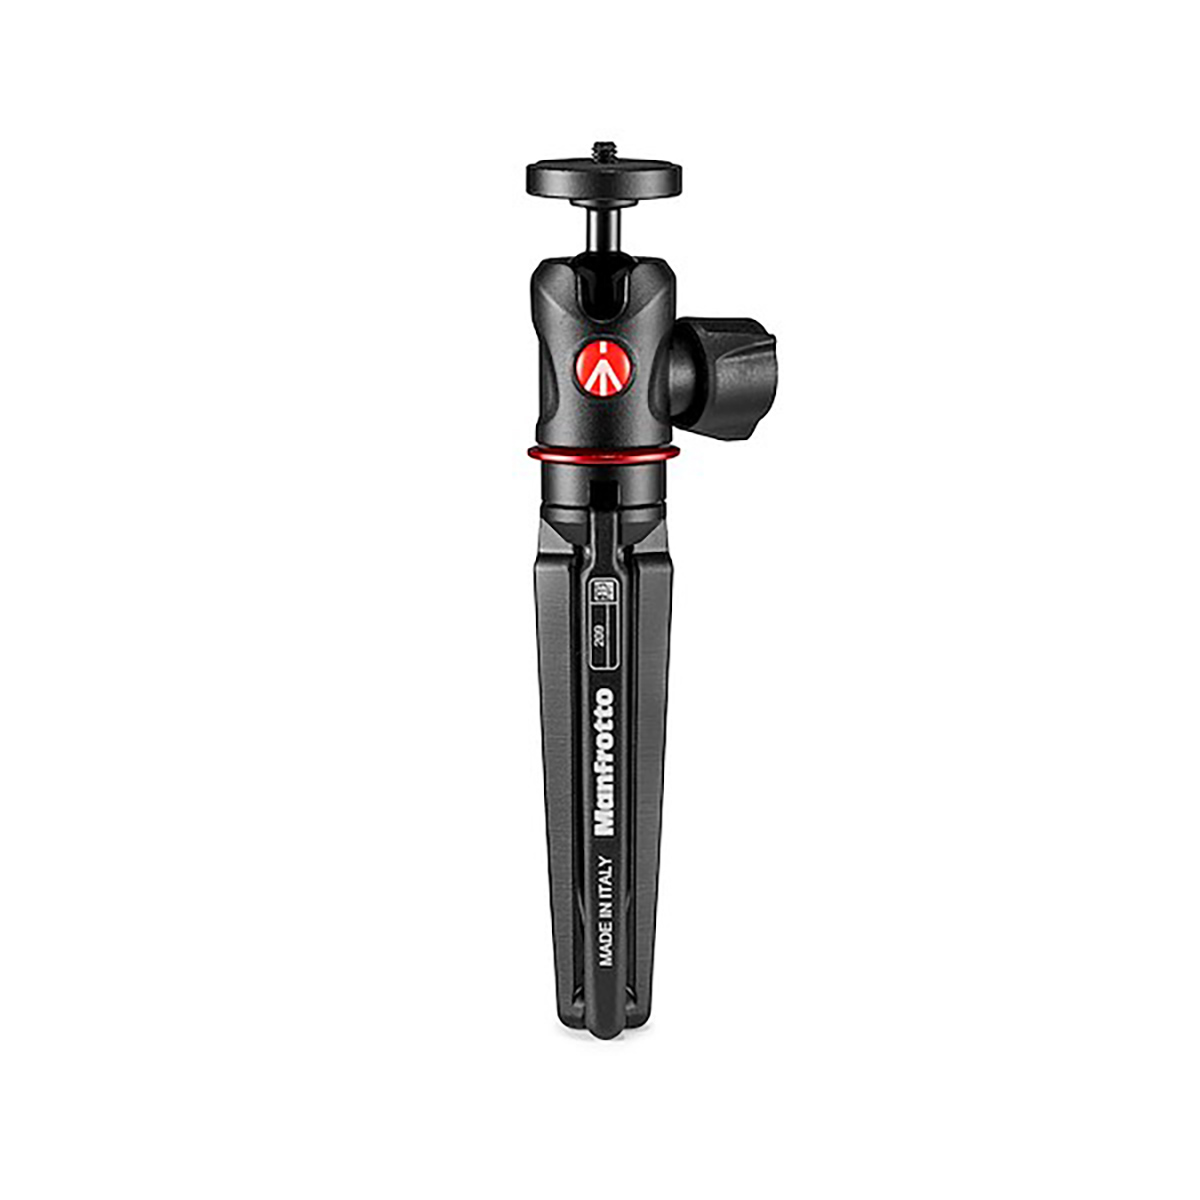 Manfrotto Table Top Tripod With 492 Ball Head